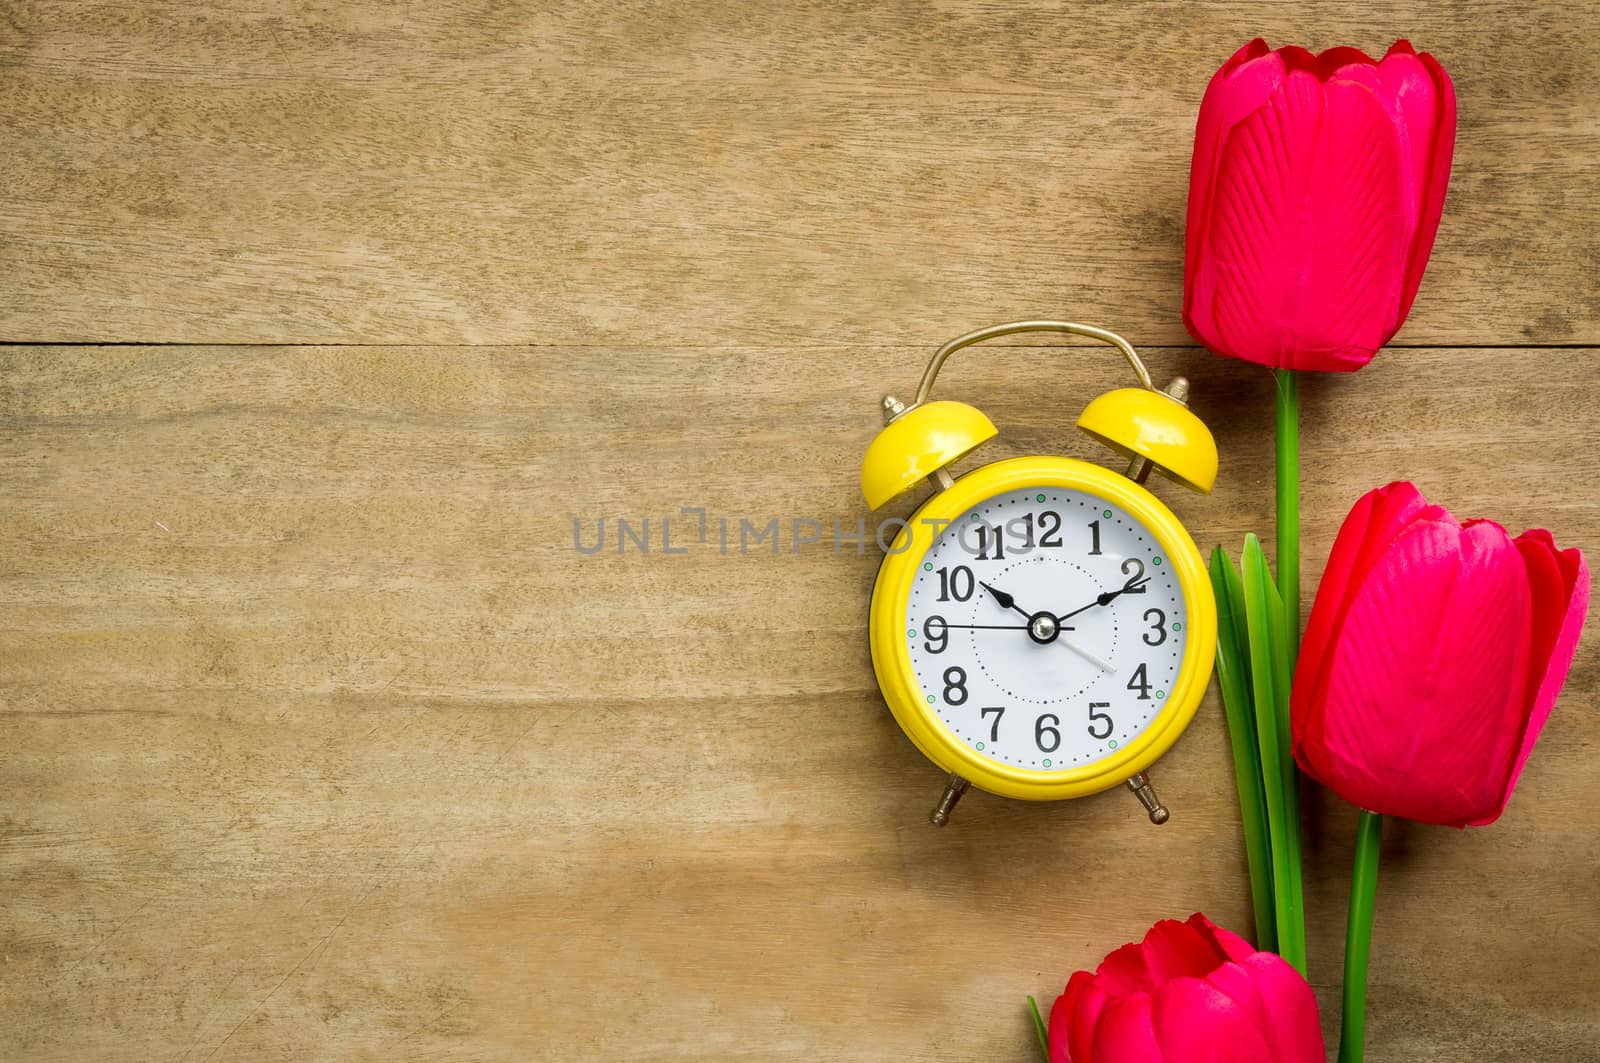 Clock nad tulips on wooden table background.